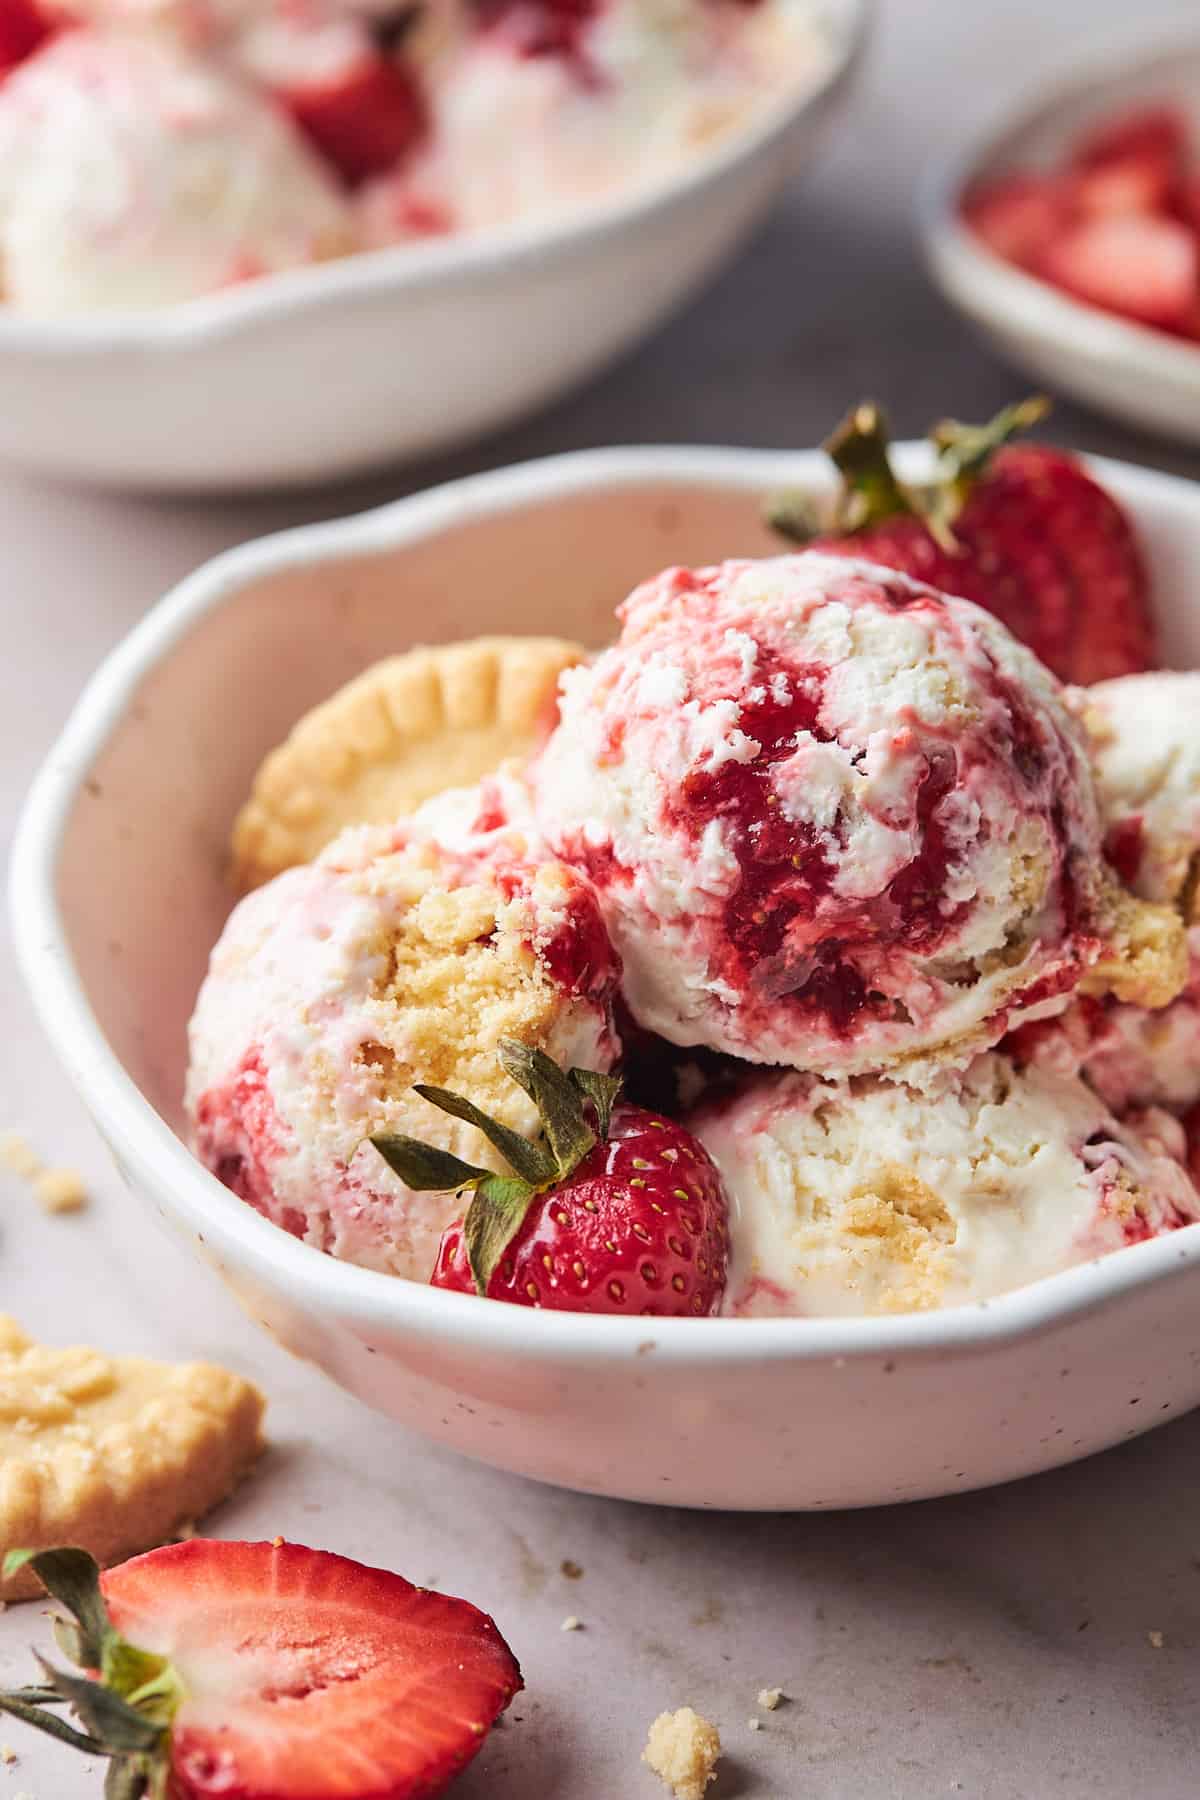 Scoops of strawberry shortcake ice cream in a large bowl ready to serve